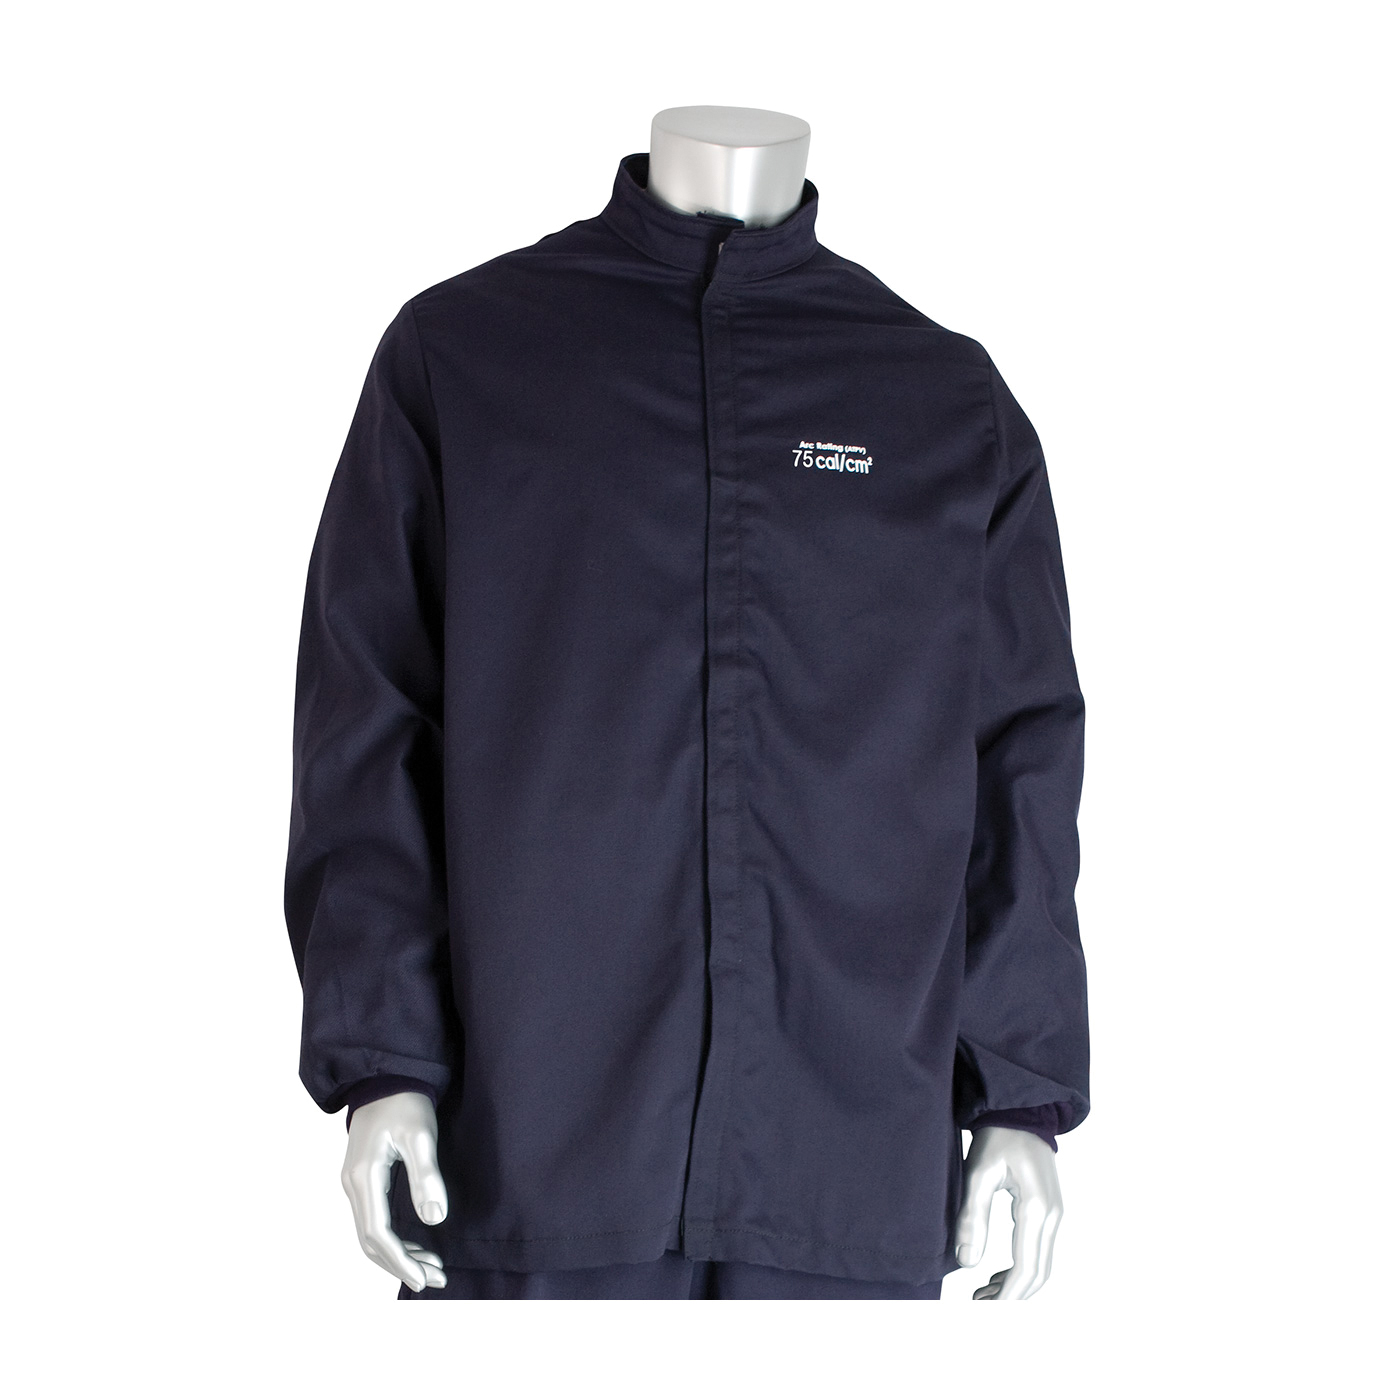 PIP® 9100-75000/3X Arc and Flame Resistant Jacket, 3XL, Navy, Westex® UltraSoft® 88% Cotton 12% High Tenacity Nylon, 56 to 58 in Chest, Resists: Arc and Flame, ASTM F1506-10a, ASTM F2178-12